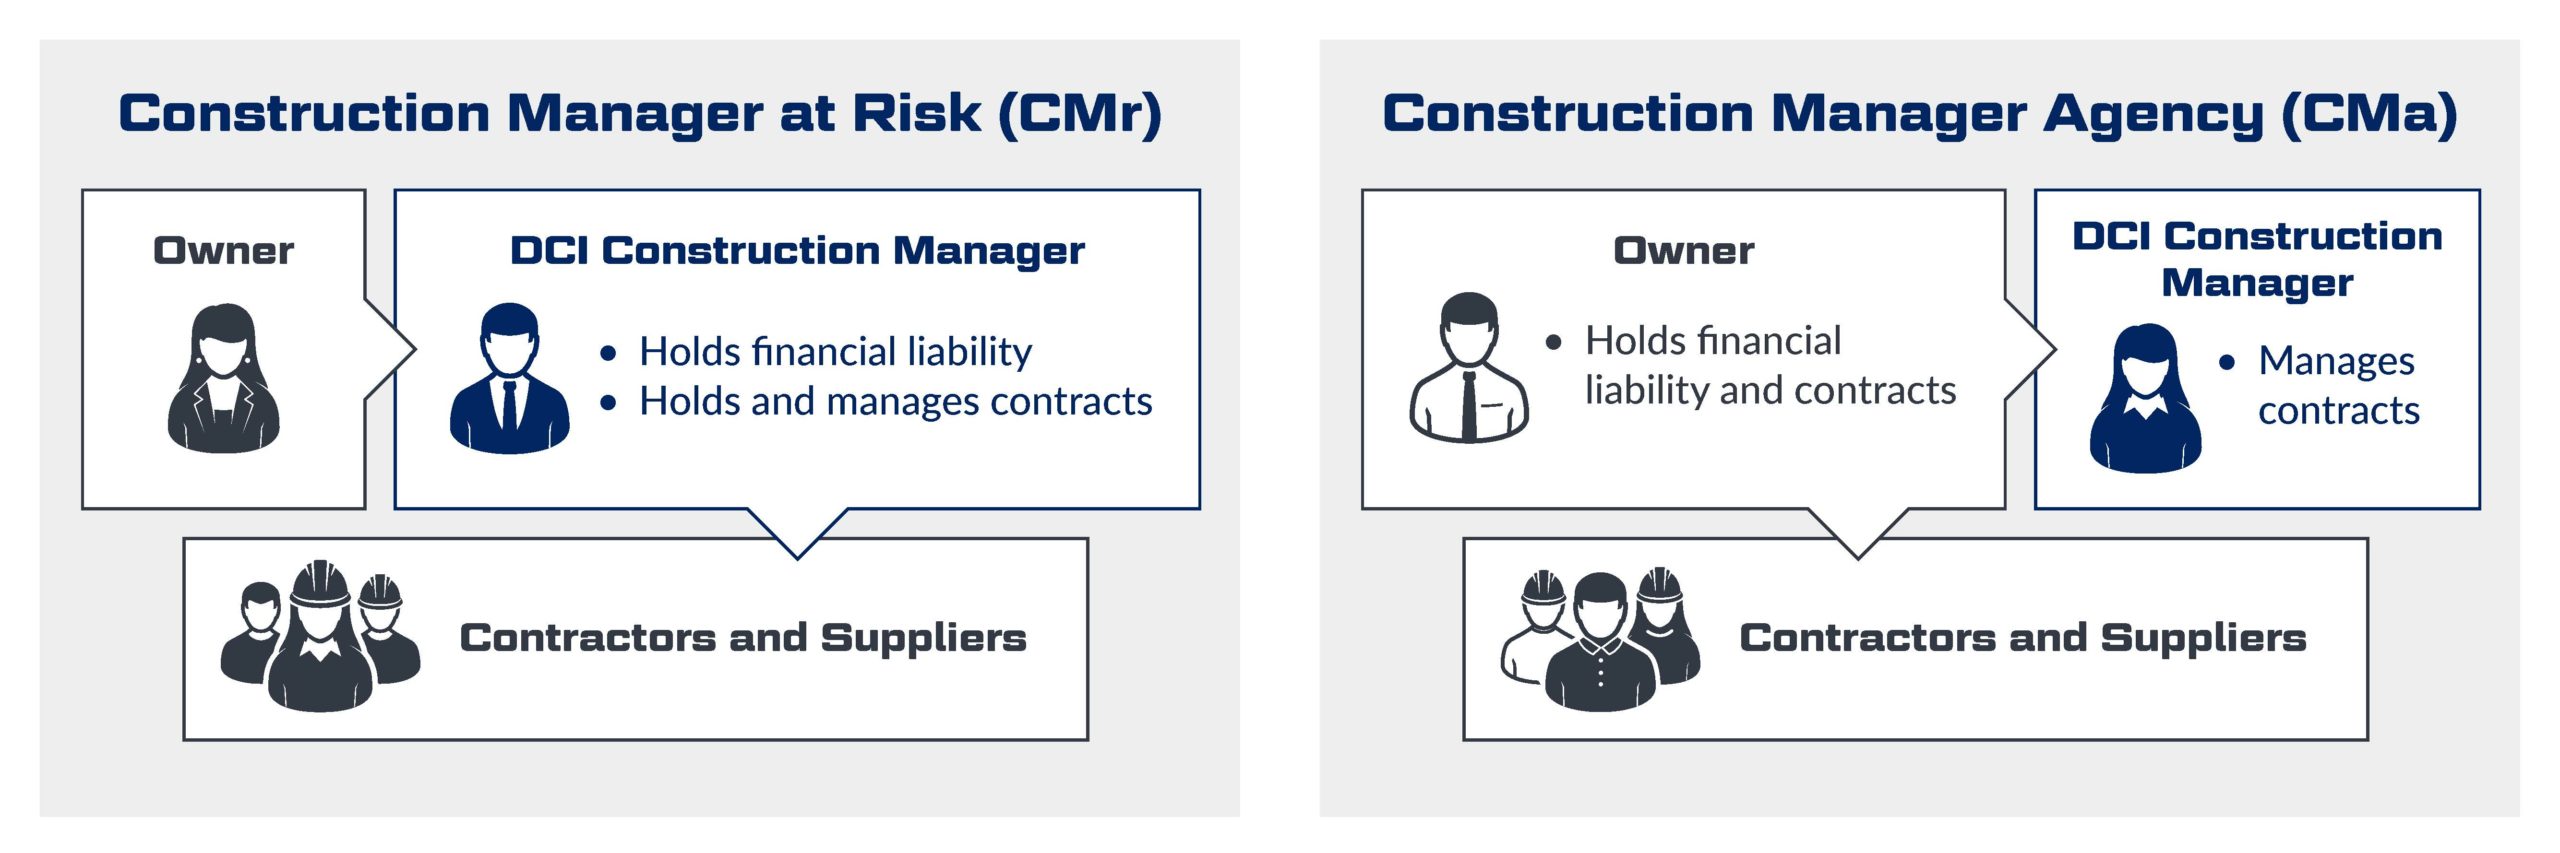 Construction Manager At Risk vs Construction Agency